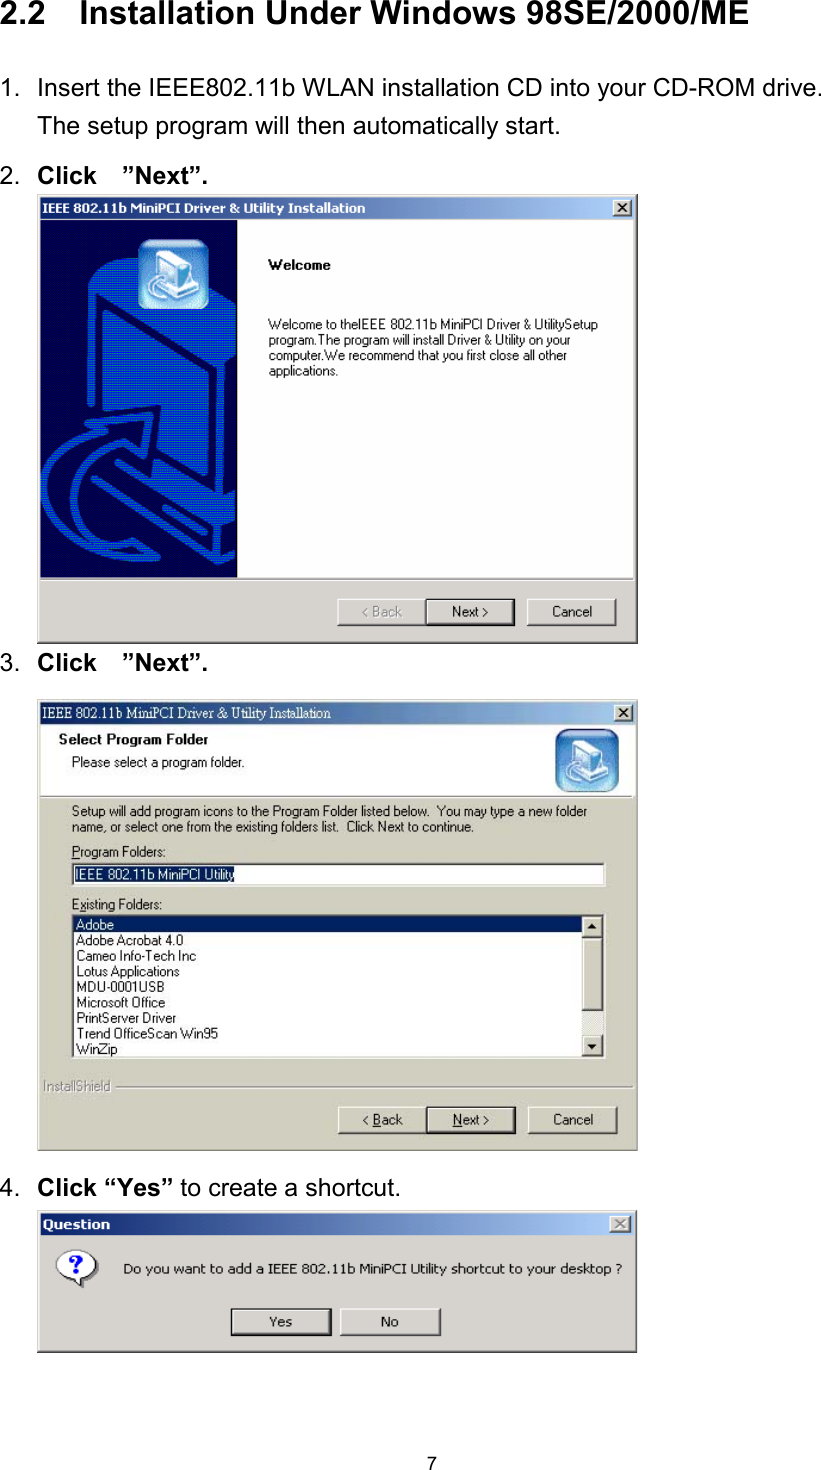  72.2    Installation Under Windows 98SE/2000/ME 1.  Insert the IEEE802.11b WLAN installation CD into your CD-ROM drive.   The setup program will then automatically start.   2.  Click  ”Next”.3.  Click  ”Next”.4.  Click “Yes” to create a shortcut. 